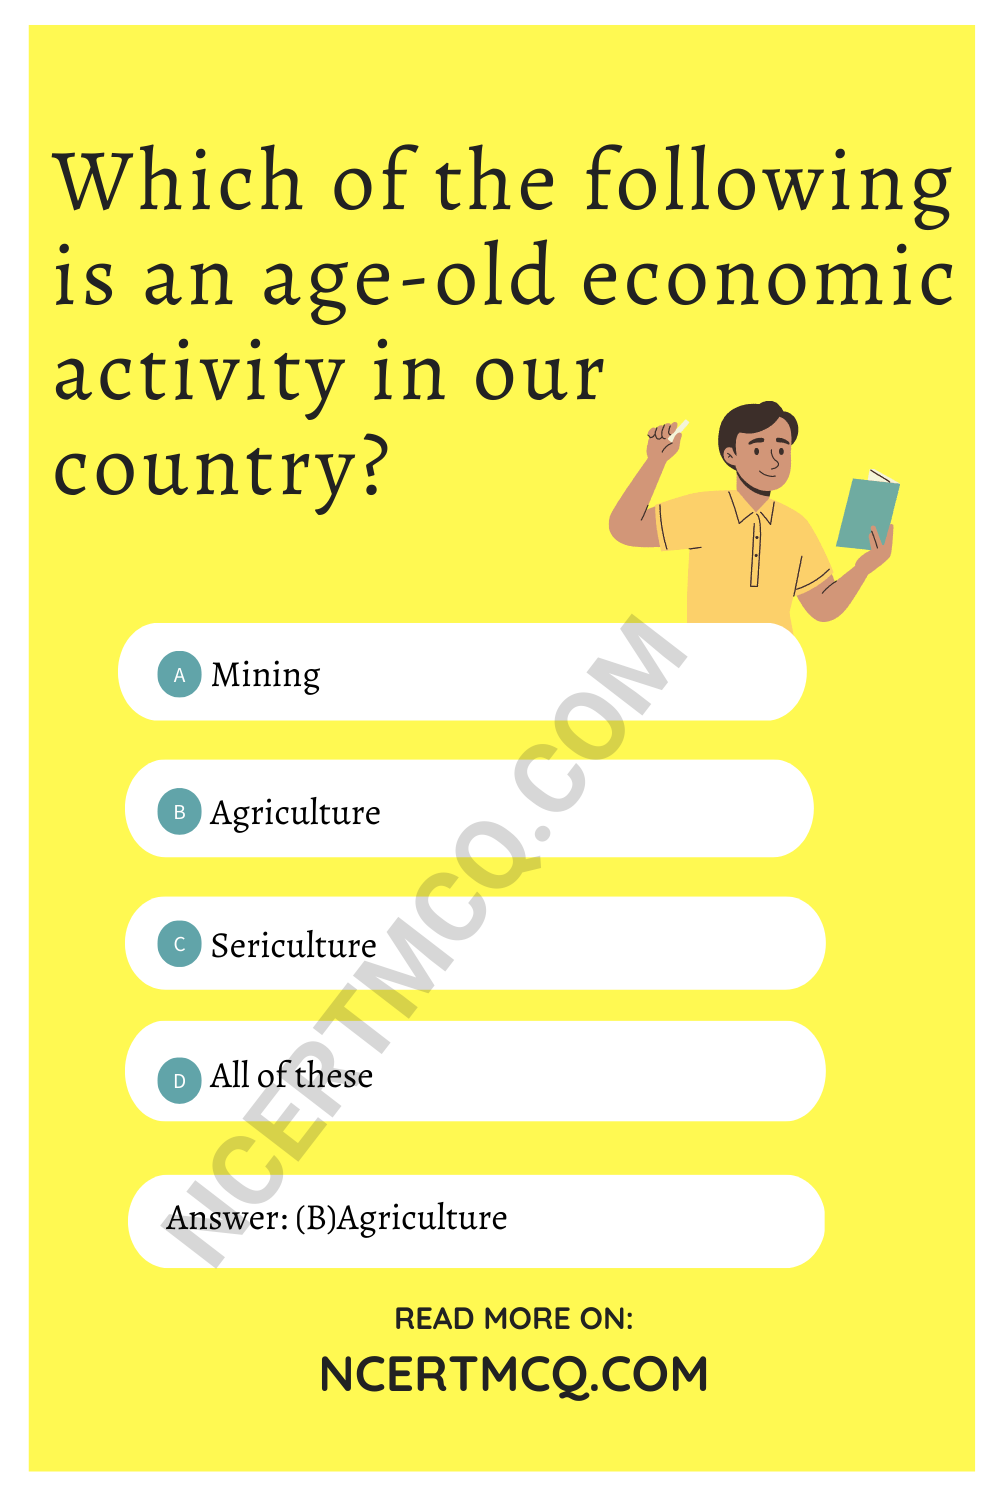 Which of the following is an age-old economic activity in our country?